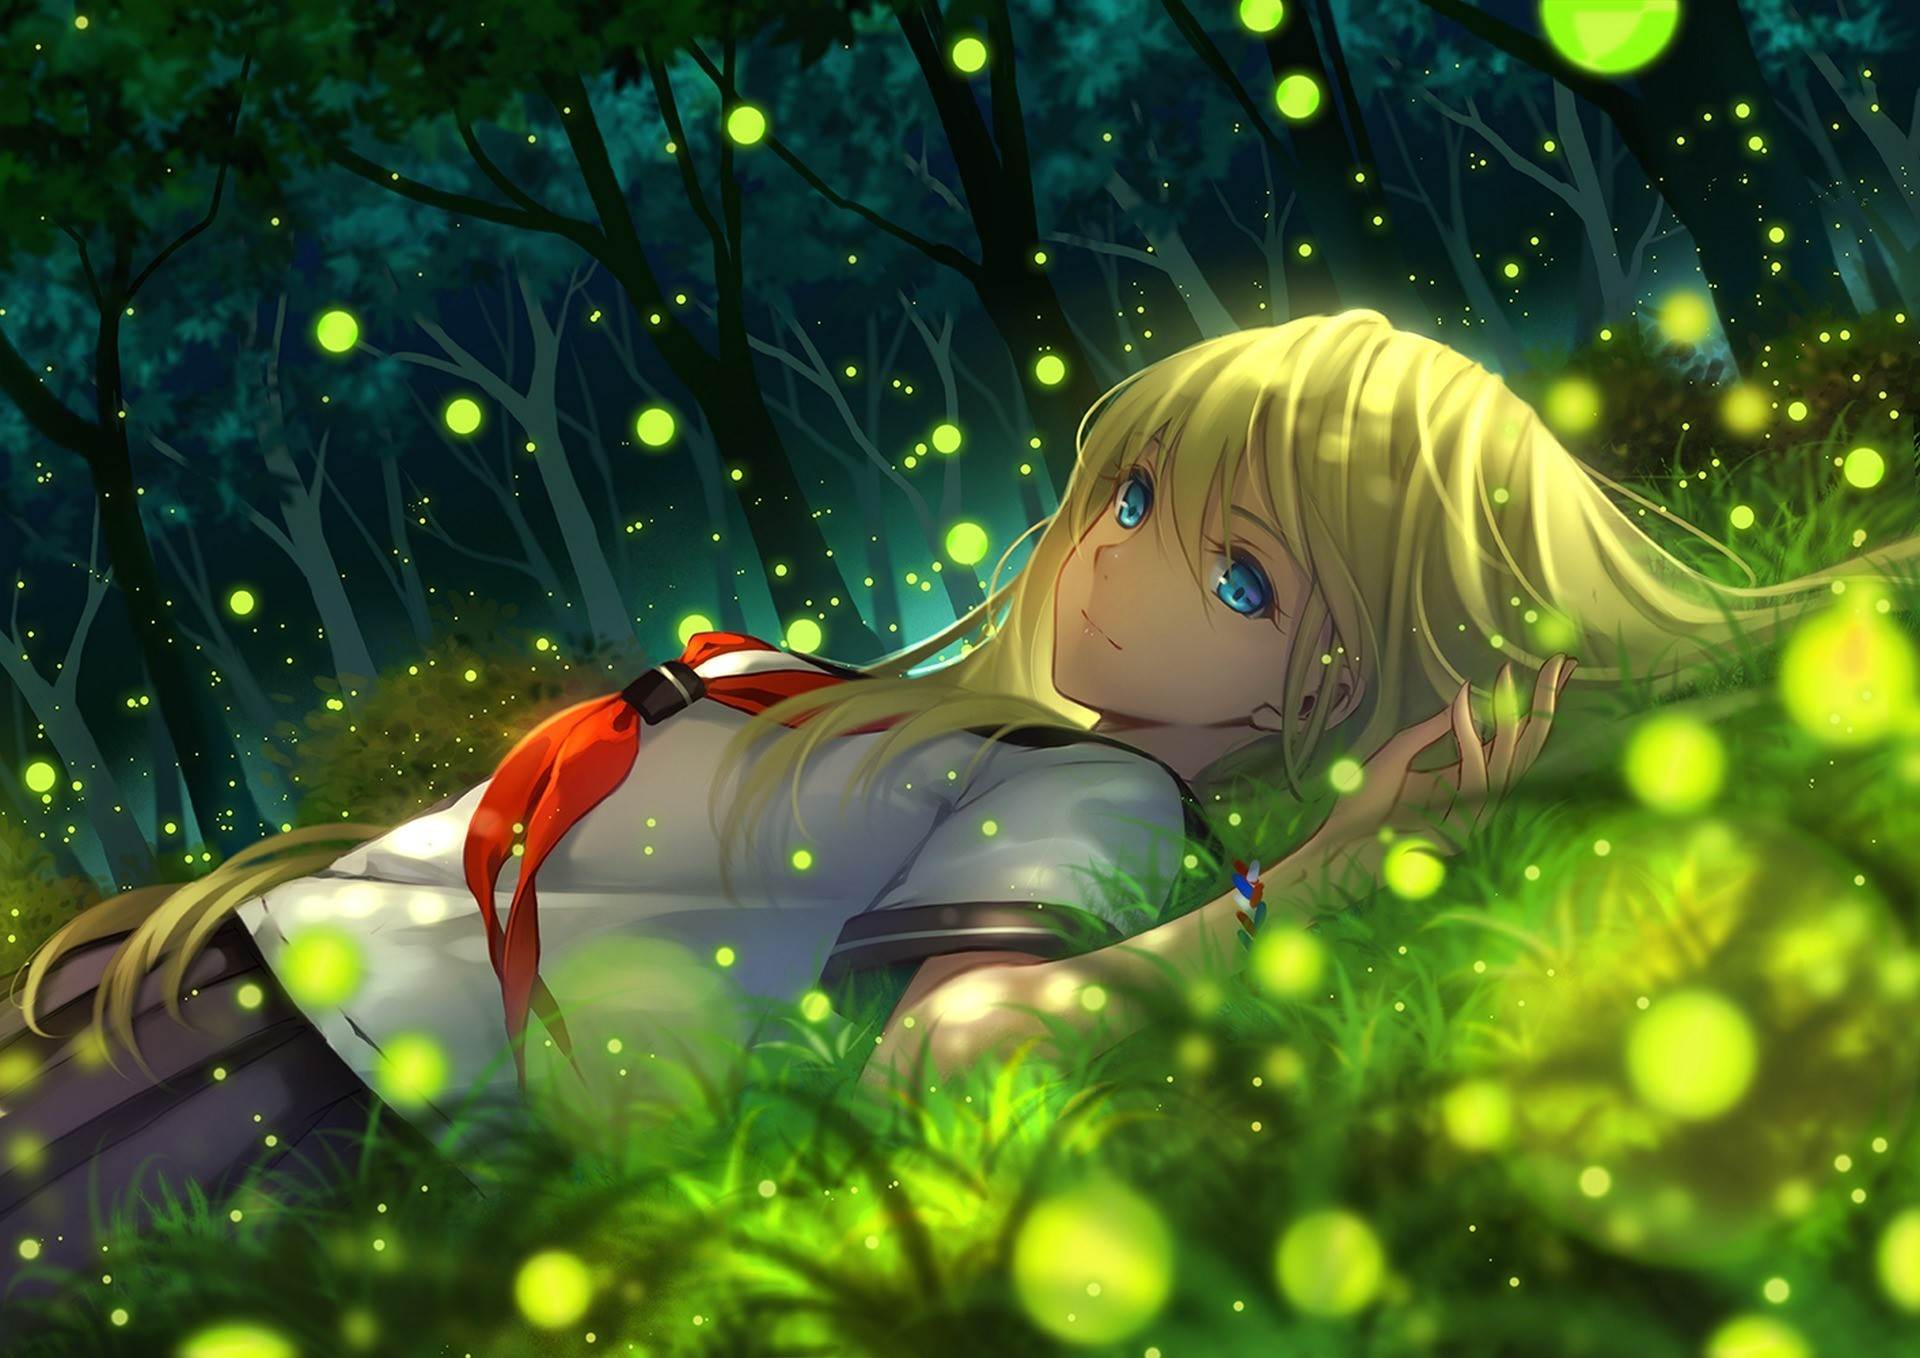 Desktop Wallpaper Original, Anime, Sleeping, Half Submerged In Water, Hd  Image, Picture, Background, 4e26a6